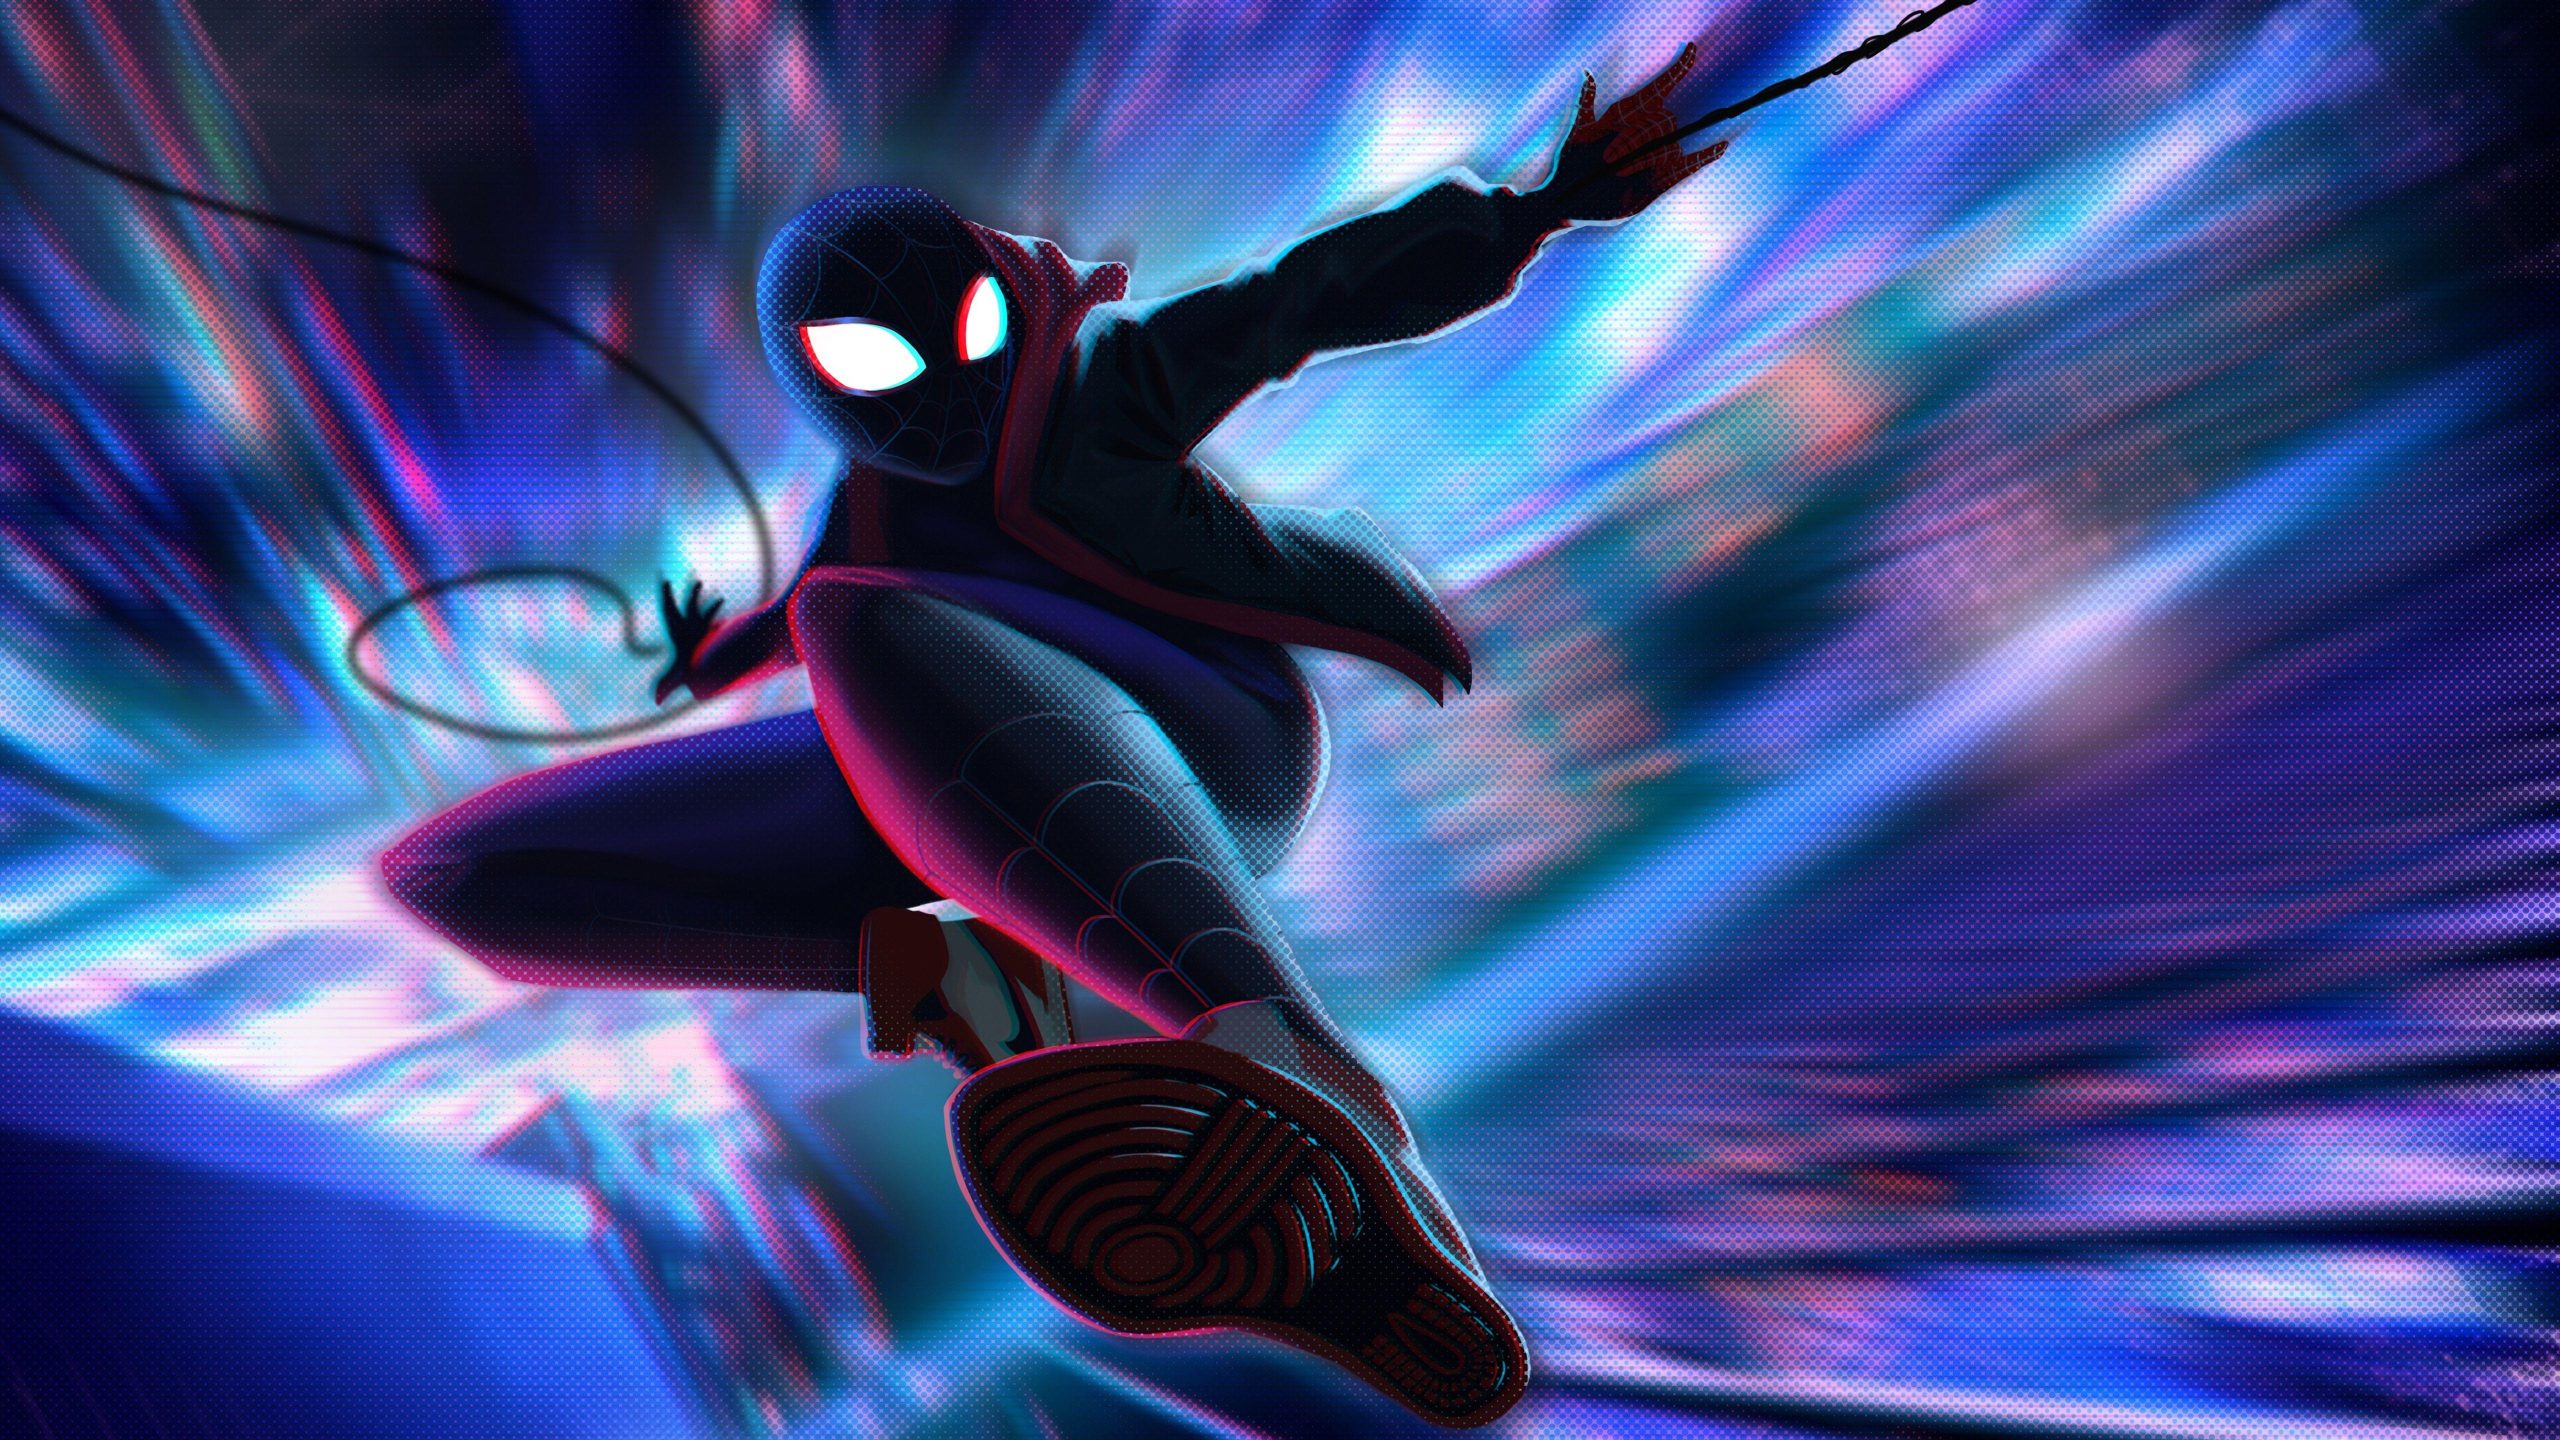 Miles Morales Leap Of Faith 4k Wallpapers, Miles Morales Leap Of Faith 4k, Movies